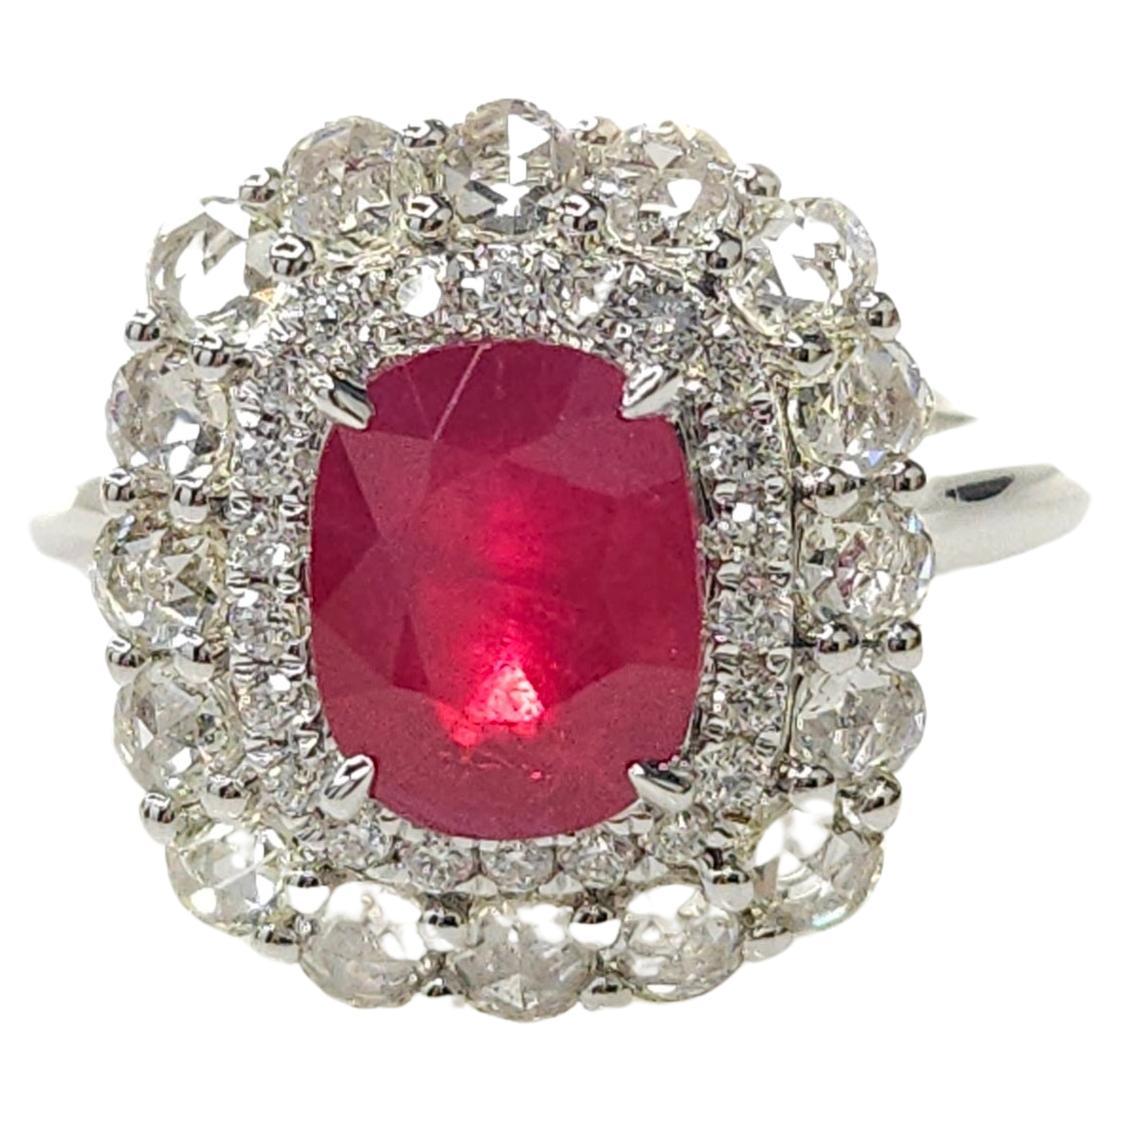 Step into the world of glamour and sophistication with this exquisite double halo ring featuring a stunning IGI Certified 2.26 Carat ruby in a deep purplish-red color, elegantly cut into a rectangular cushion shape. The intense hue of the ruby